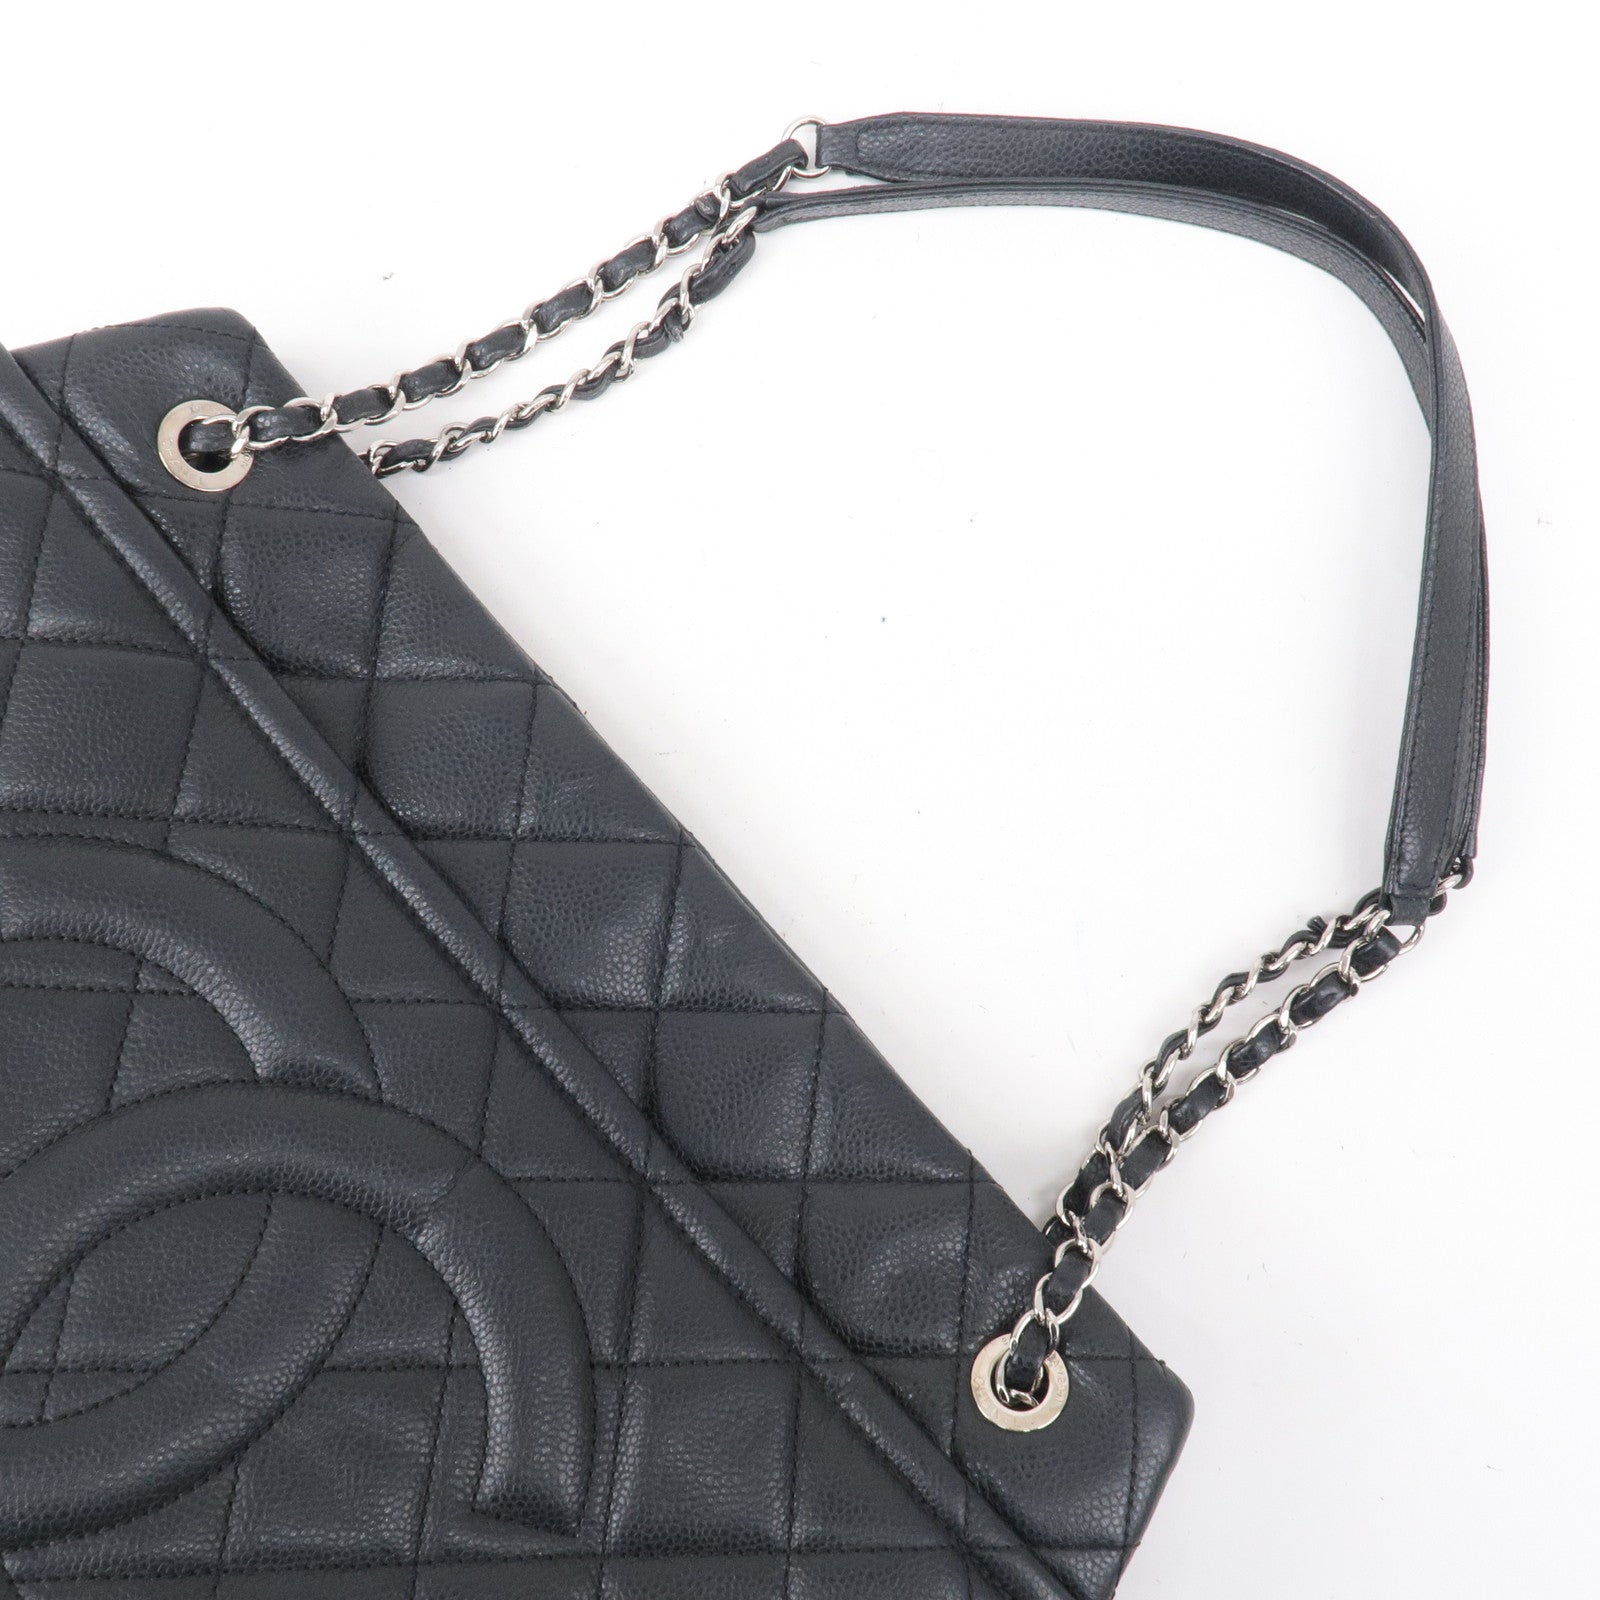 Chanel Black Quilted Caviar Timeless Soft Shopper Tote 